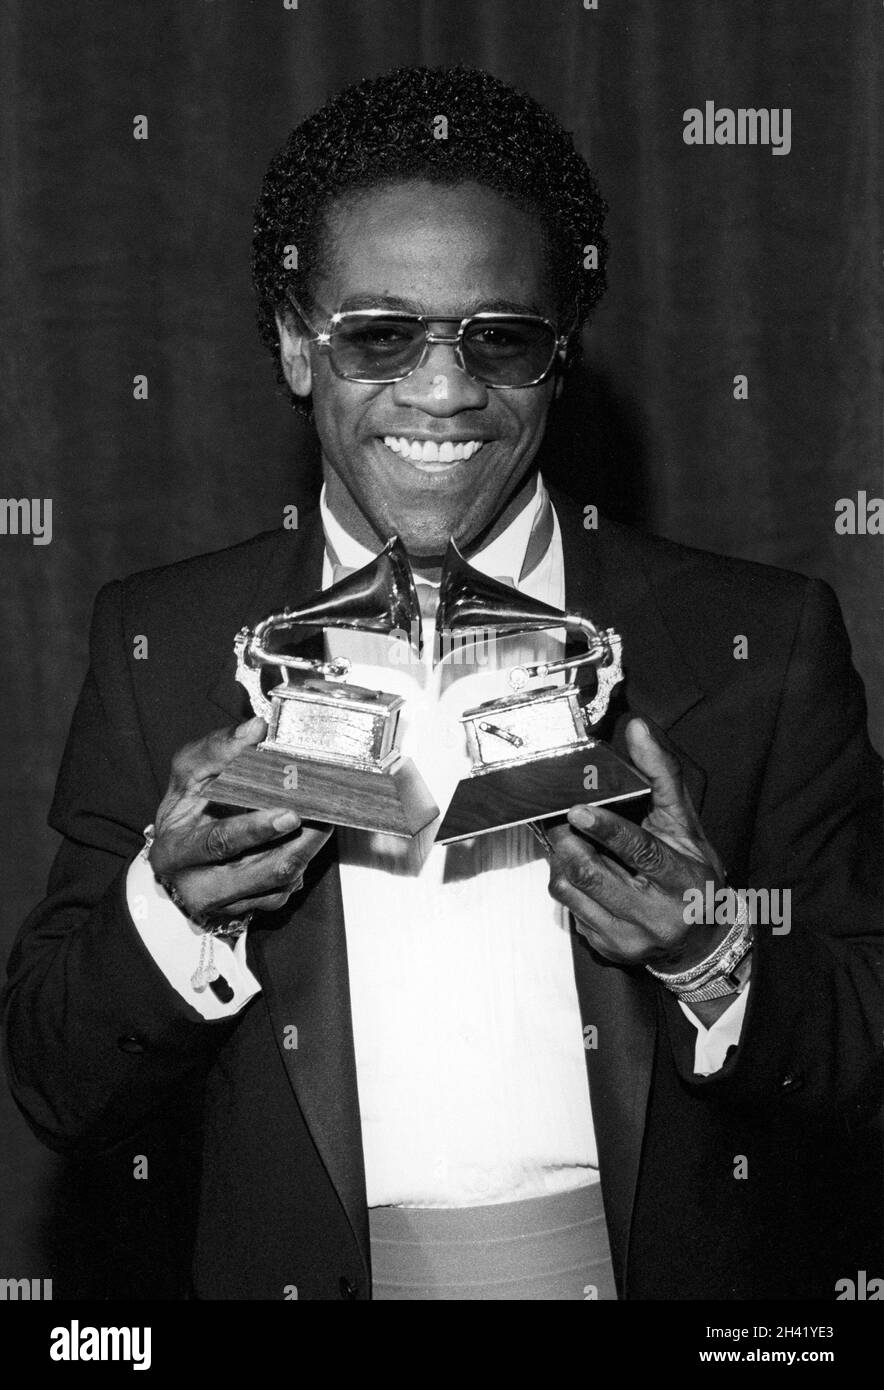 Al Green at The 25th Annual GRAMMY Awards in Los Angeles, California